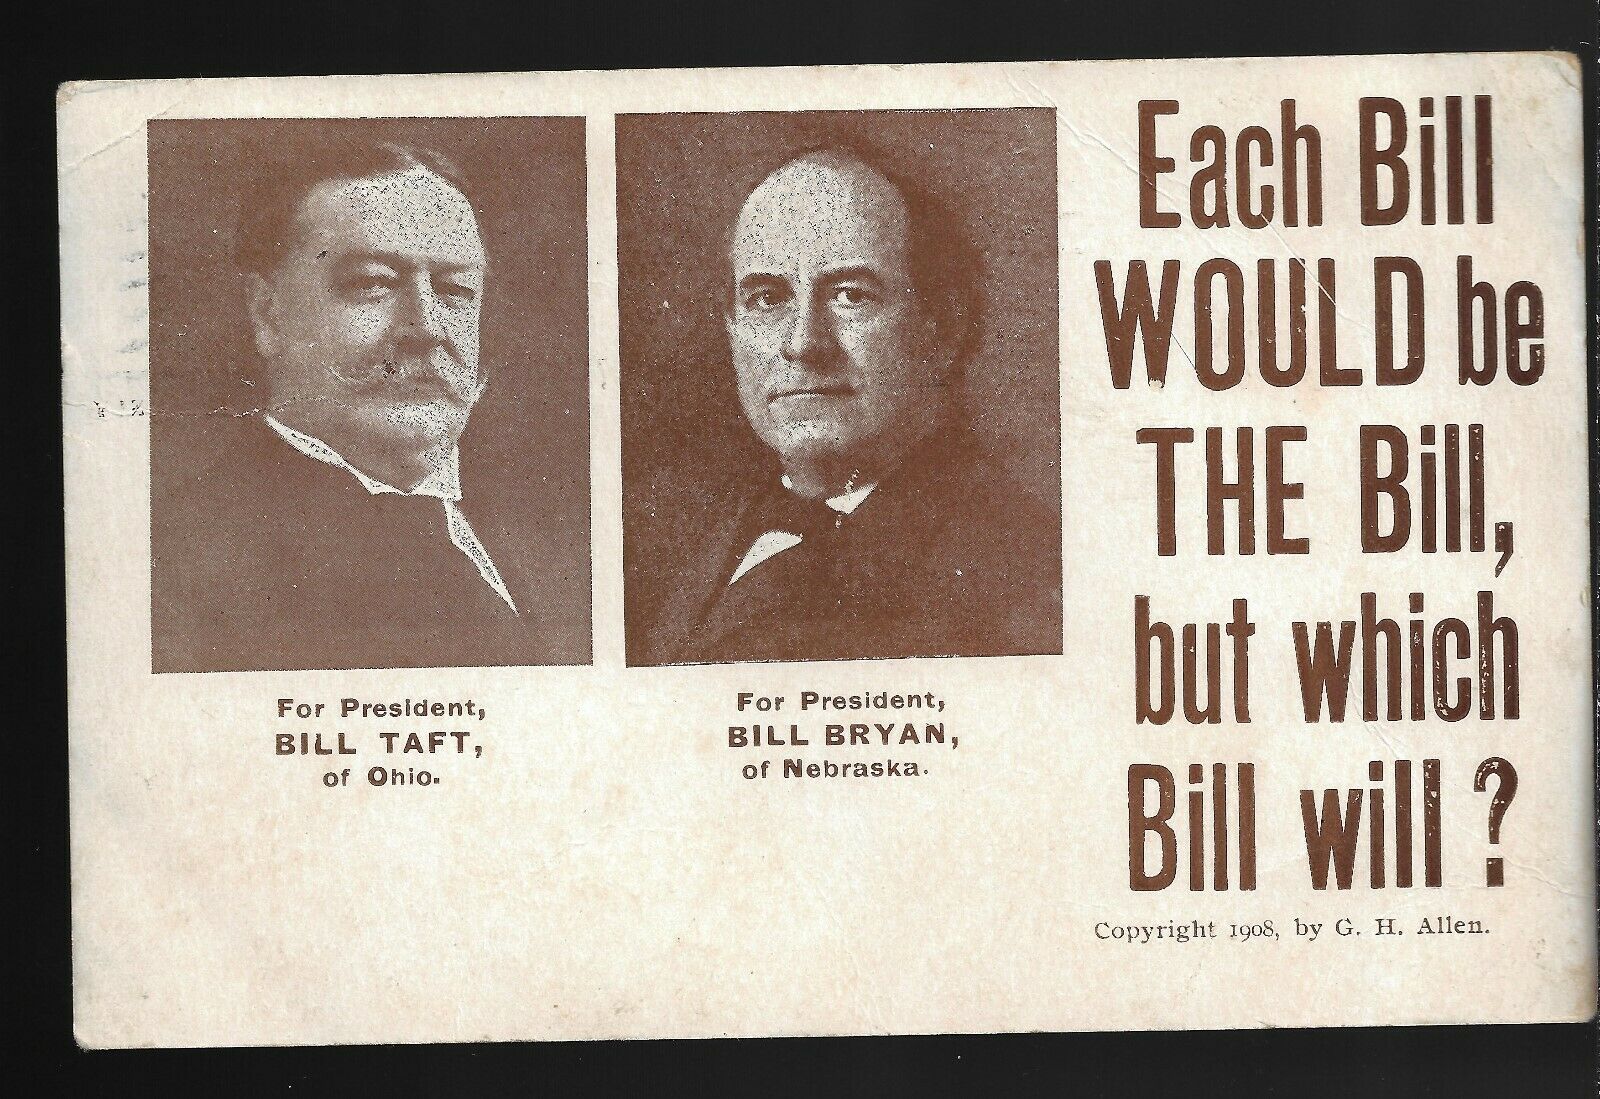 1908 election postcard with pictures of William Taft and William Jennings Bryan and the caption “Each Bill Would be THE Bill, But which Bill will?”